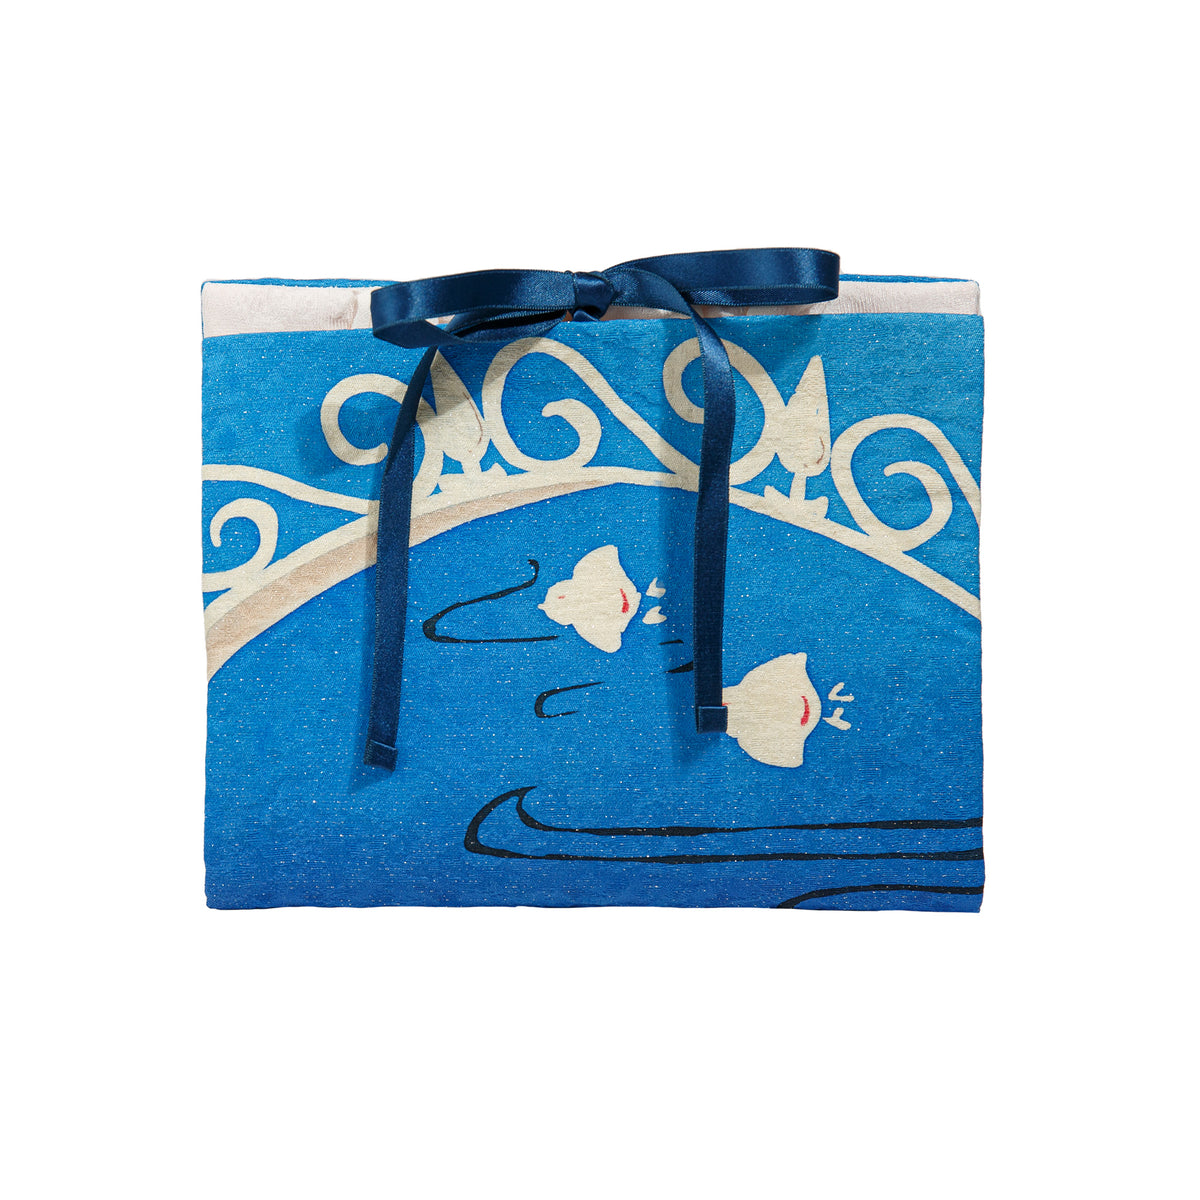 Primary image of  Chidoriya Small Lingerie Pouch - Blue